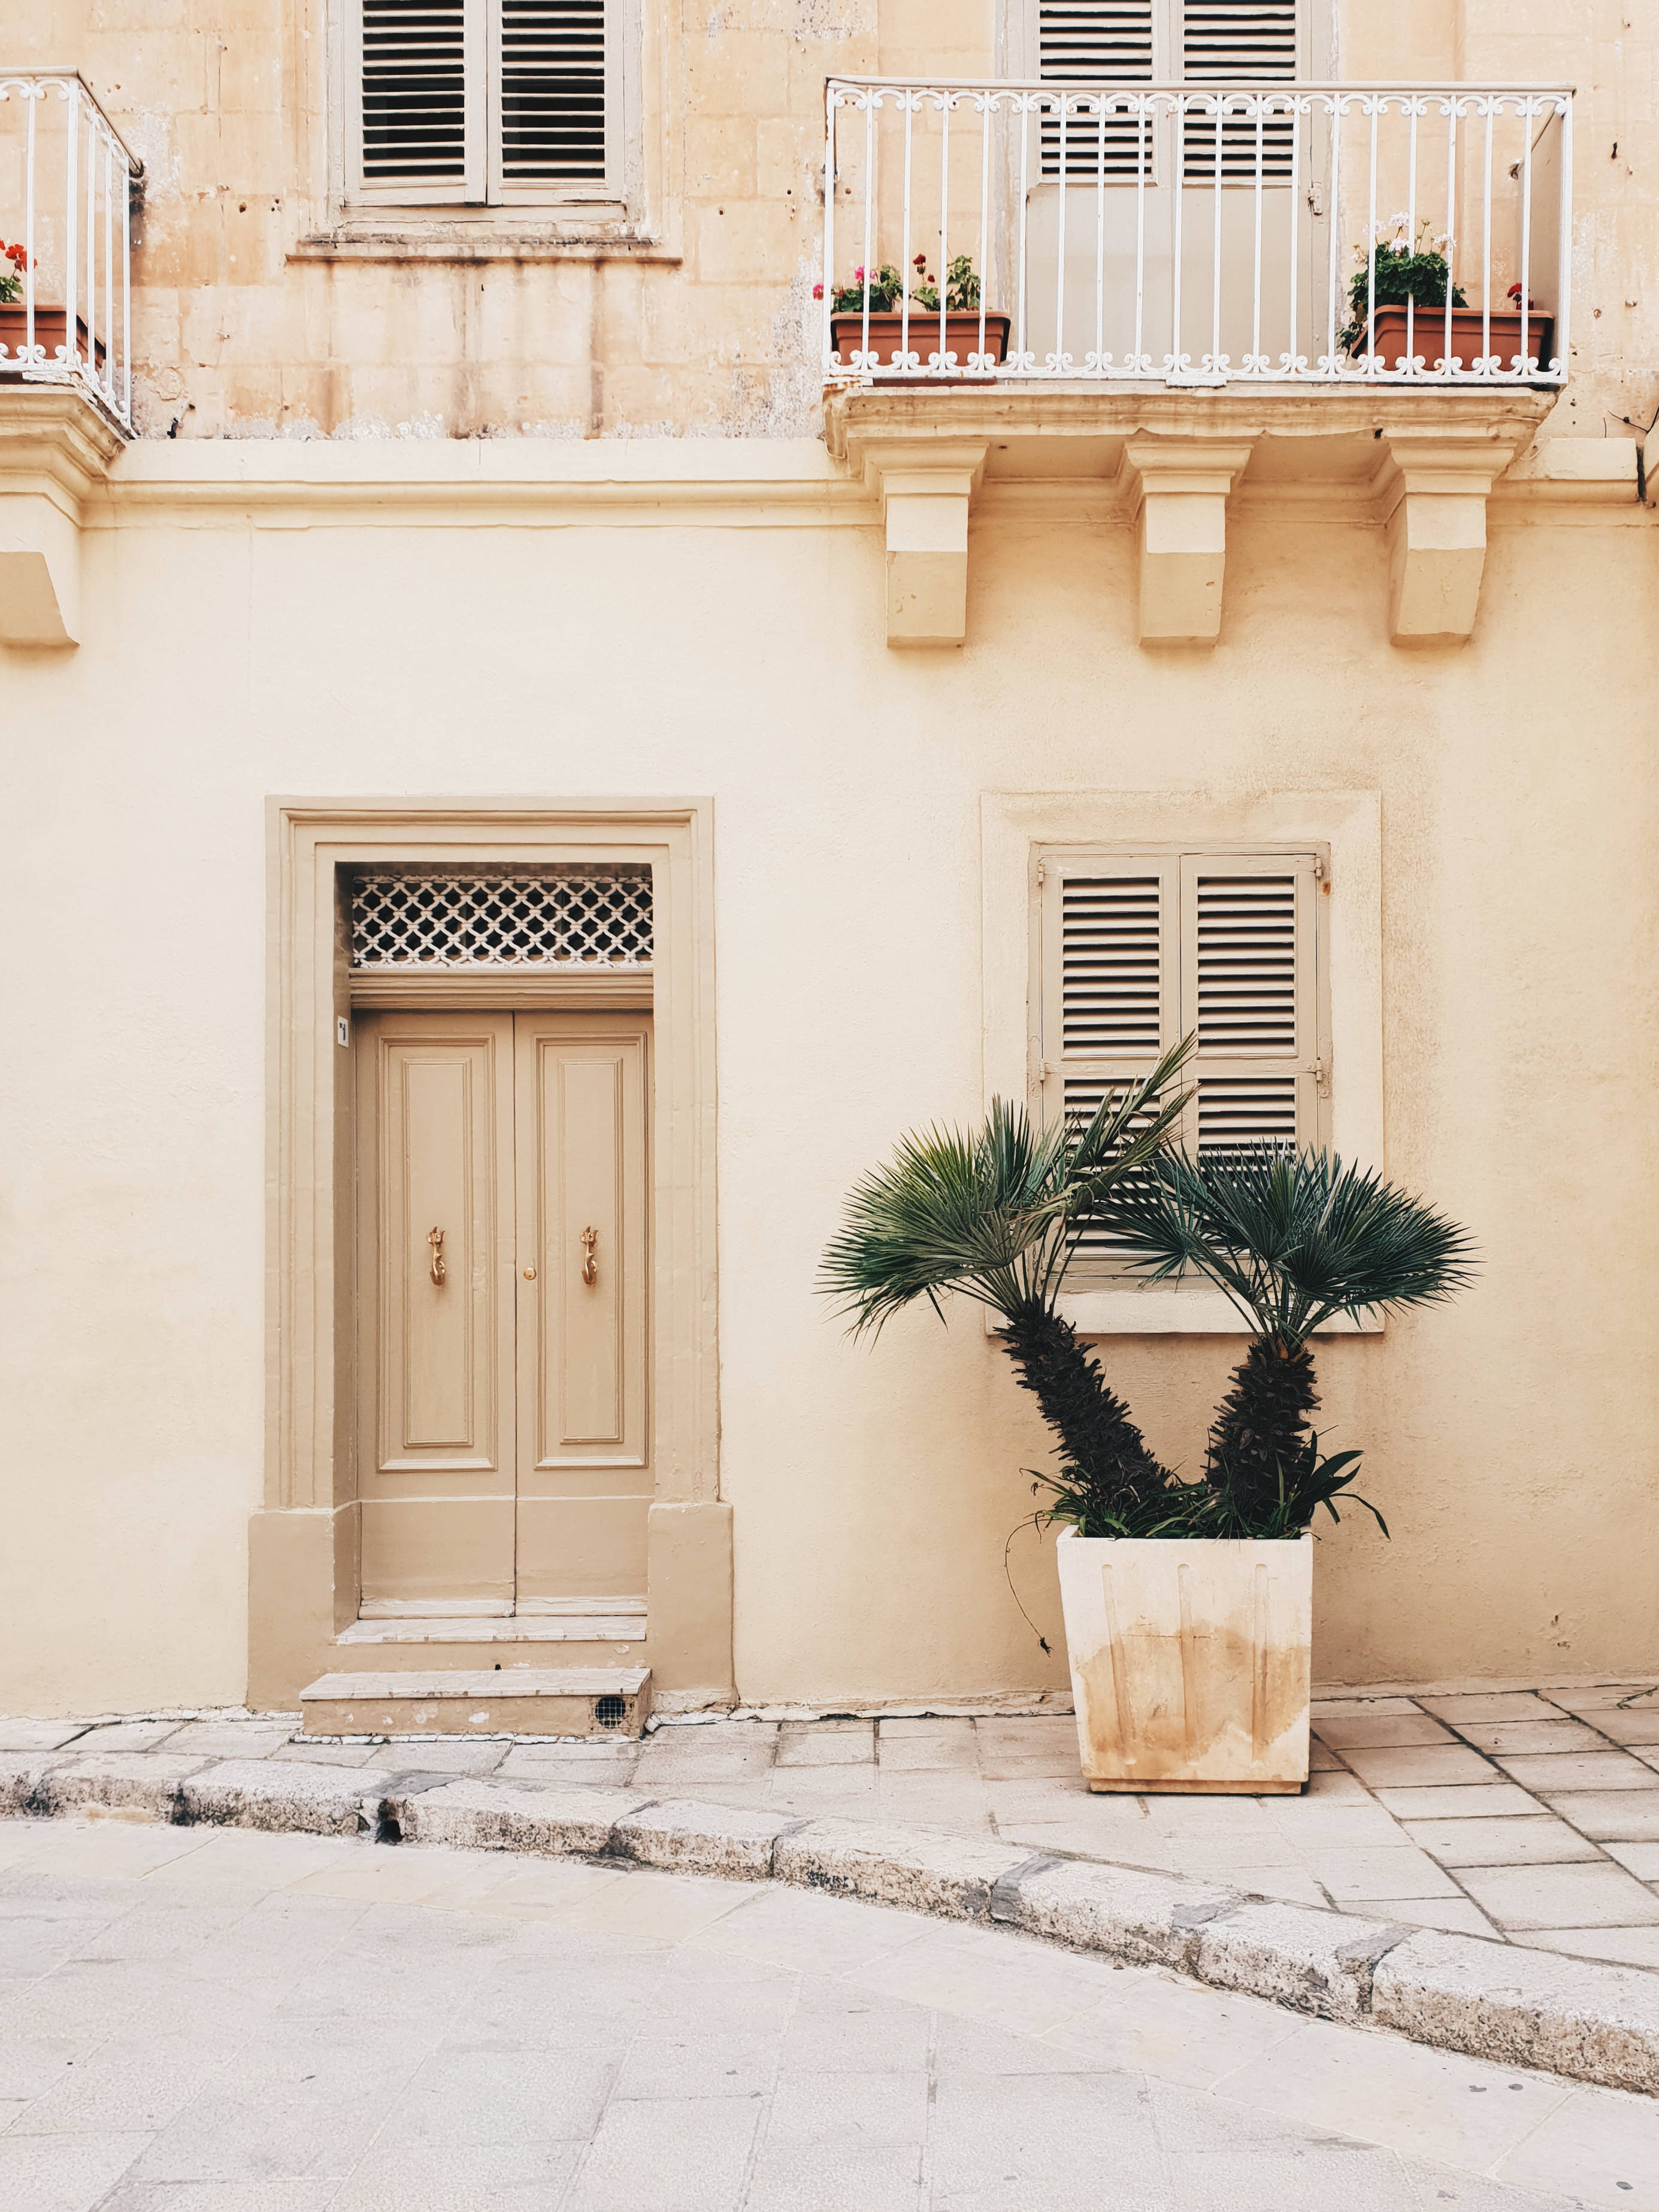 A house with a balcony, a door, a window, and a potted plant in front of it. - Royalcore, cream, beige, minimalist beige